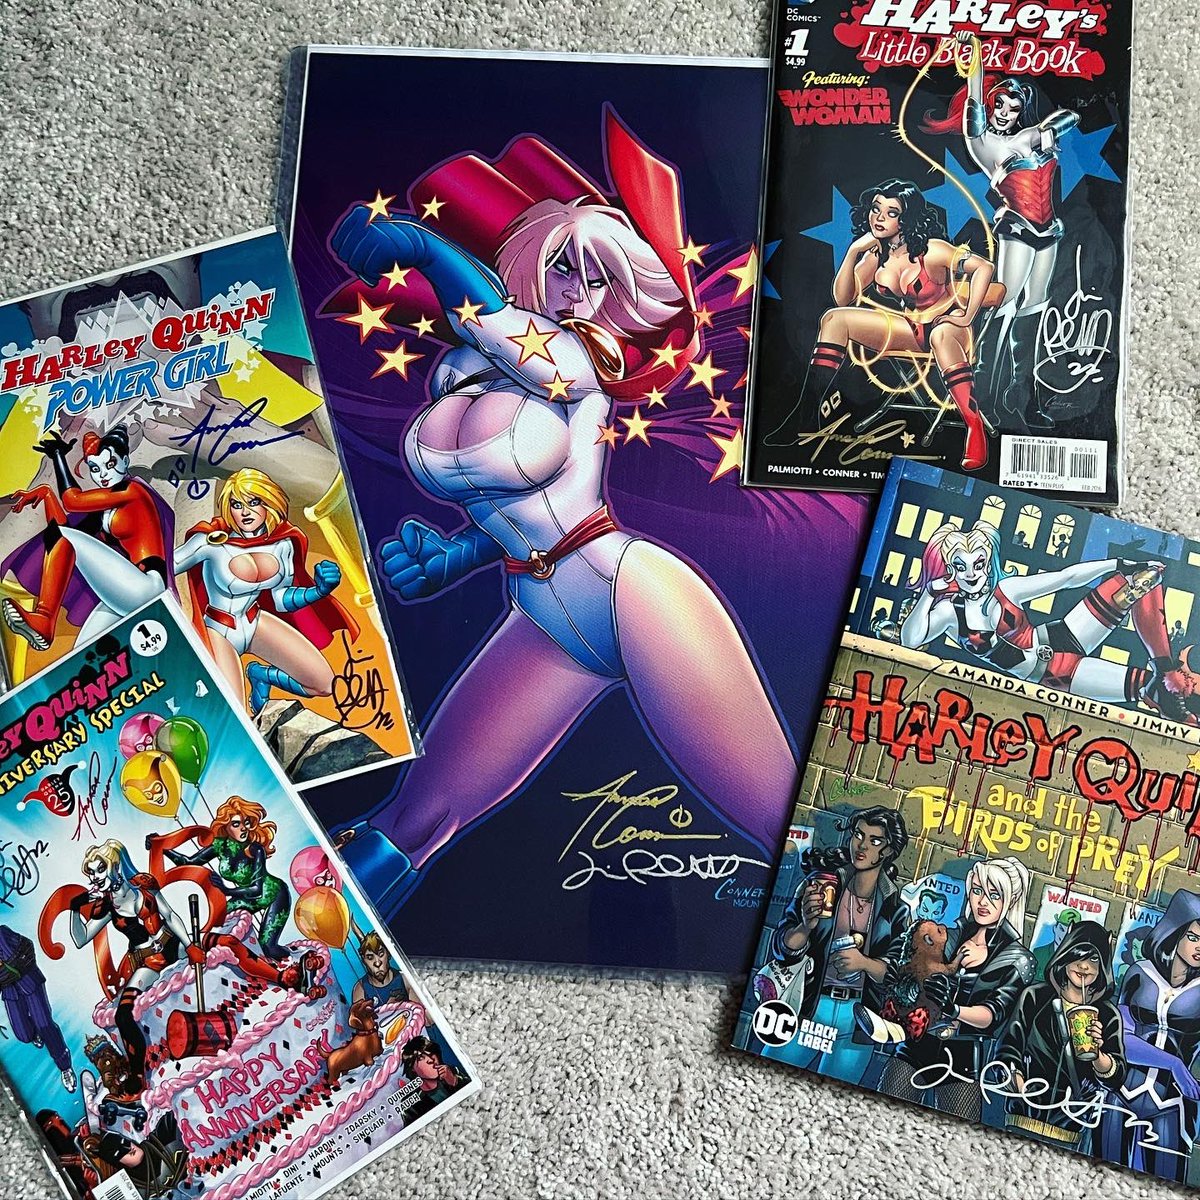 Over the weekend I had the honor of getting to meet @DCComics royalty: #AmandaConner and #JimmyPalmiotti We chatted about Power Girl and their various other projects. Highly recommend meeting them at a con! #powergirl #dcomics #heroescon #HeroesCon2022